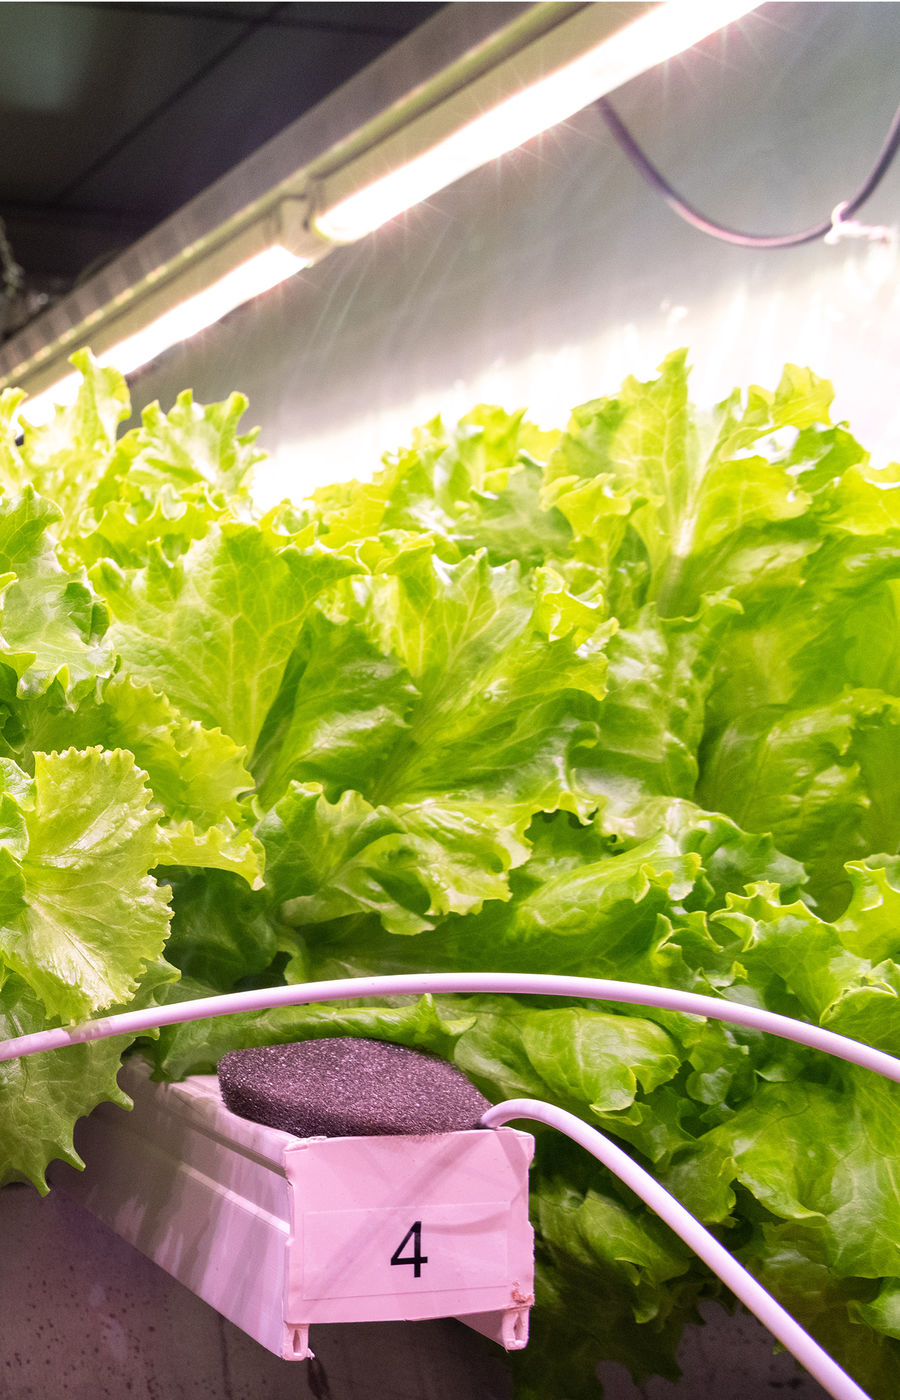 Salad growing in a vertical farming greenhouse.